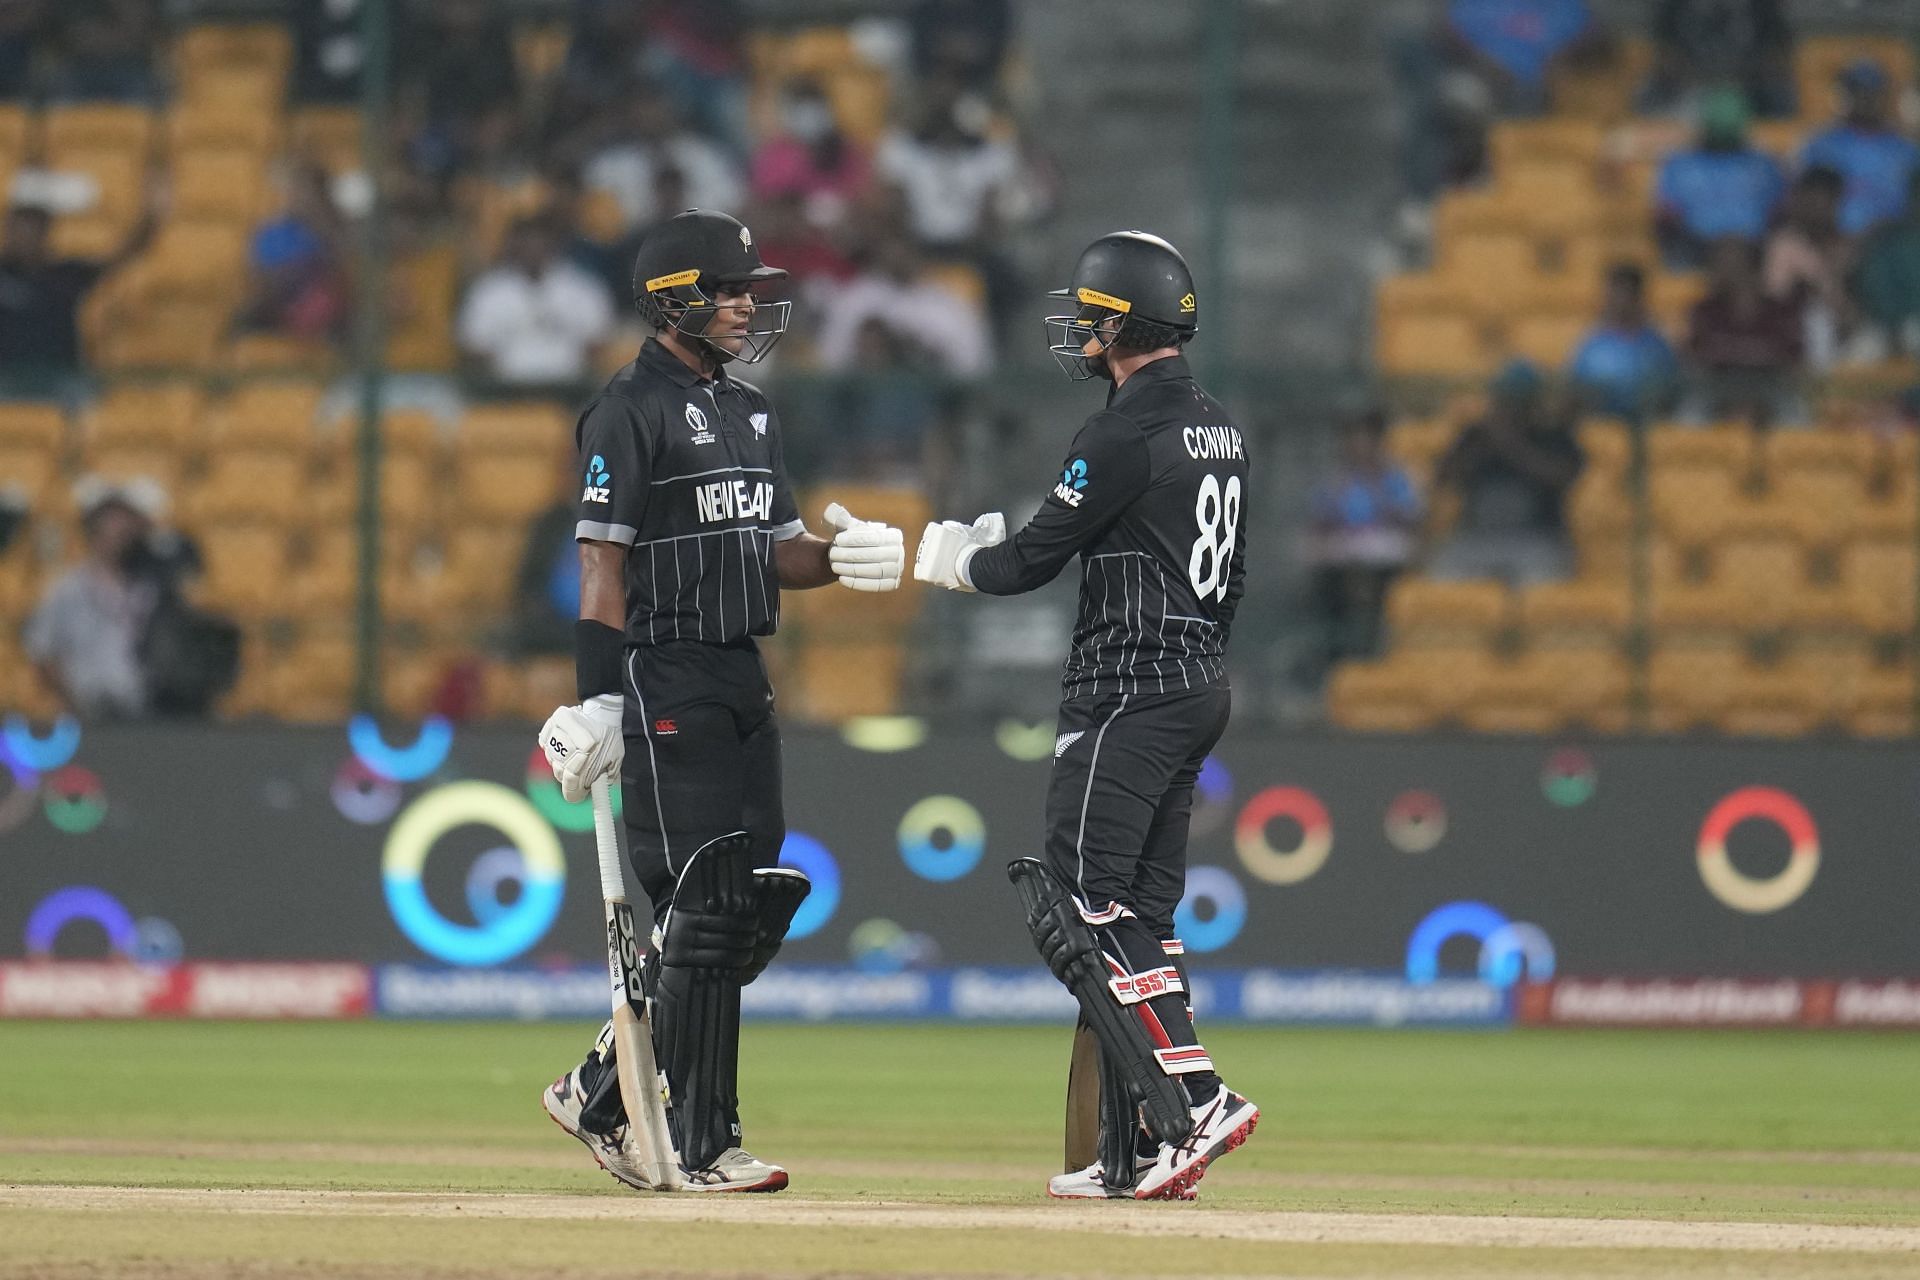 Rachin Ravindra and Devon Conway are expected to open the batting for New Zealand. [P/C: AP]